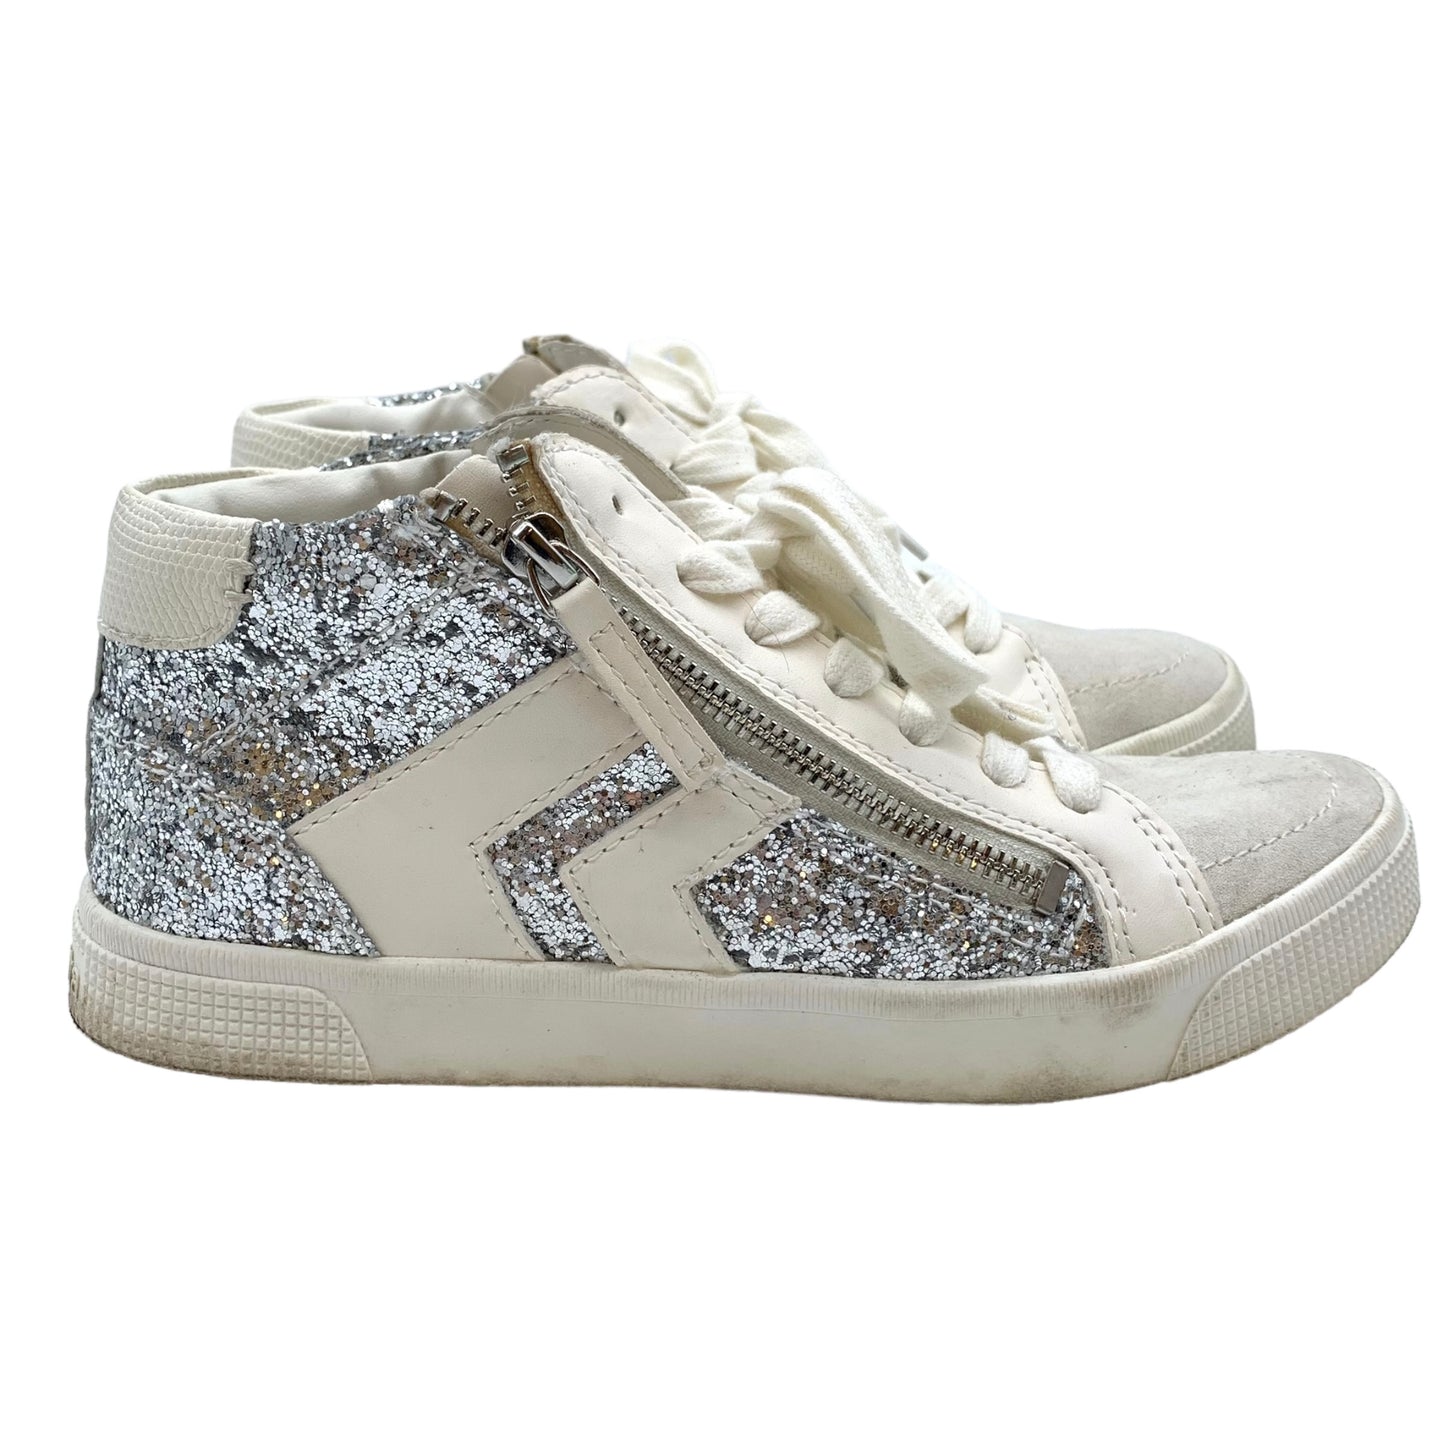 Shoes Sneakers By Dolce Vita  Size: 7